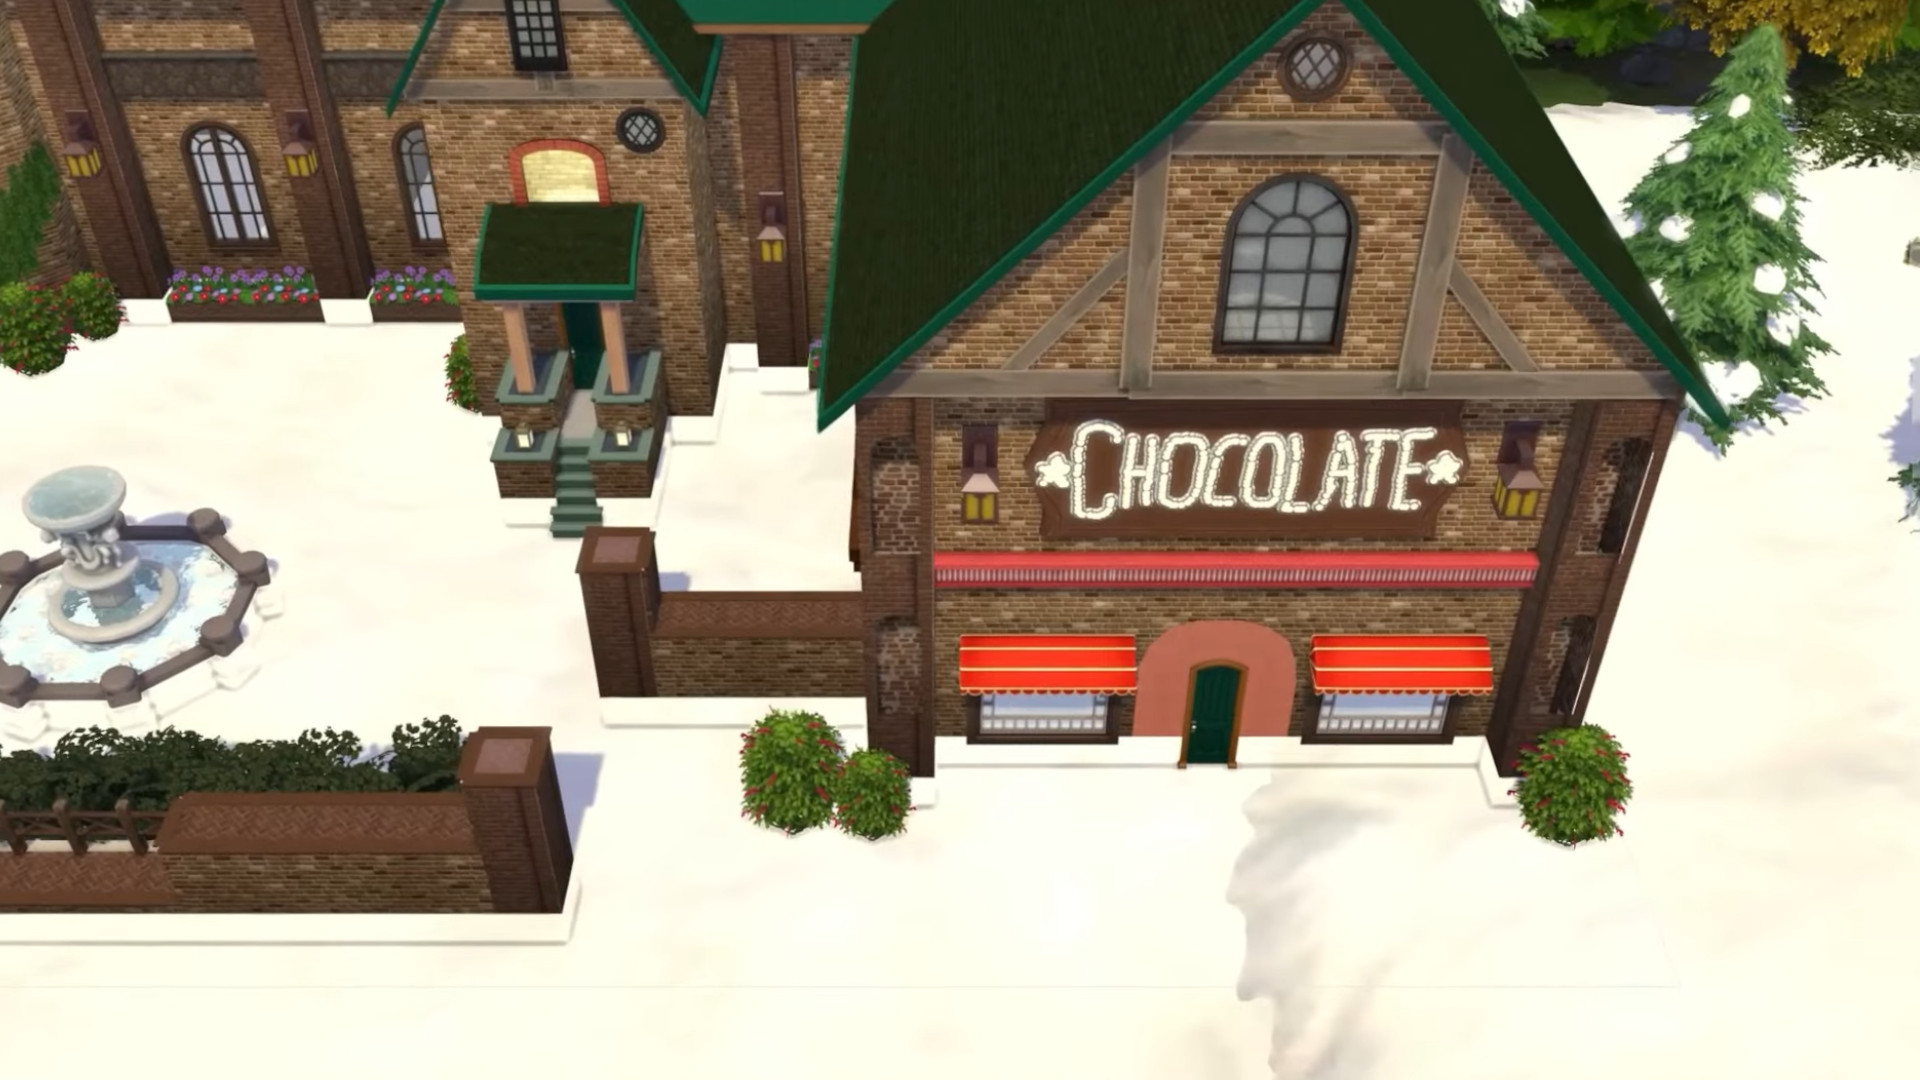 Stardew Valley creator shares the Haunted Chocolatier trailer remade in Sims 4